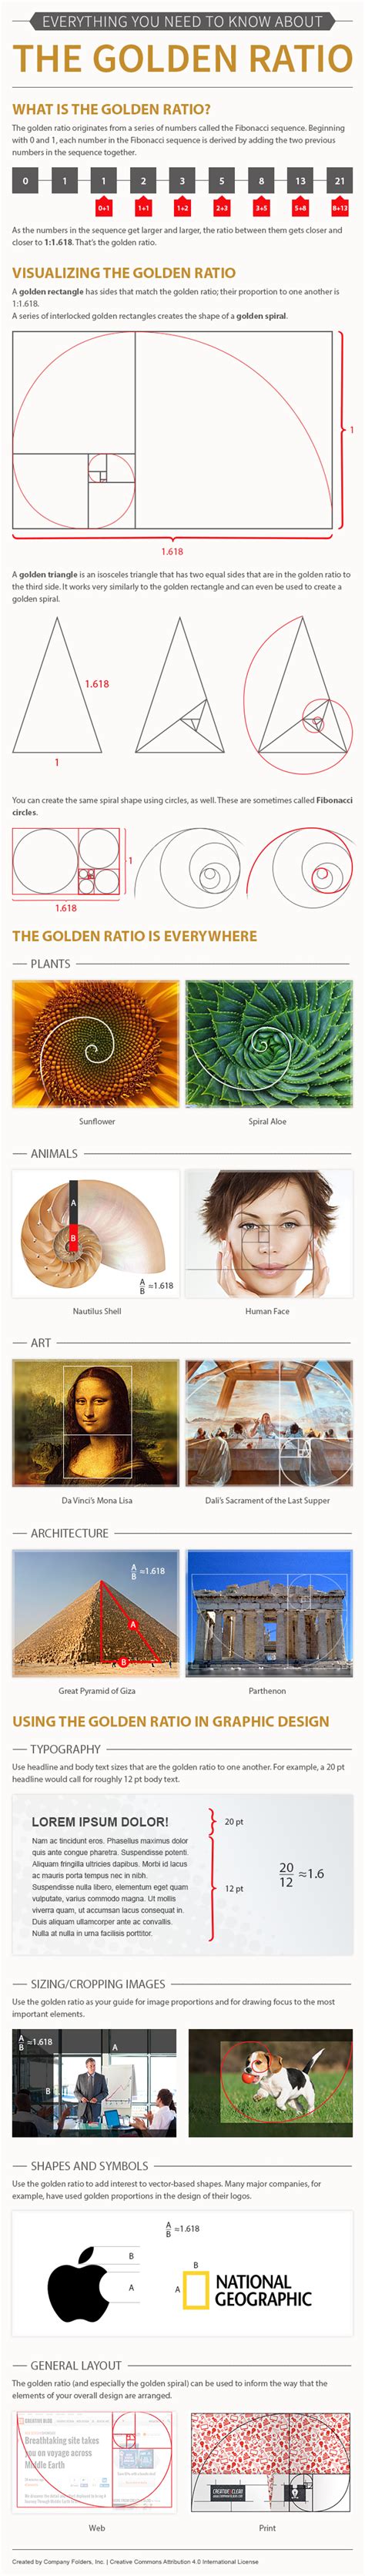 How to Use the Golden Ratio in Design (with Examples)